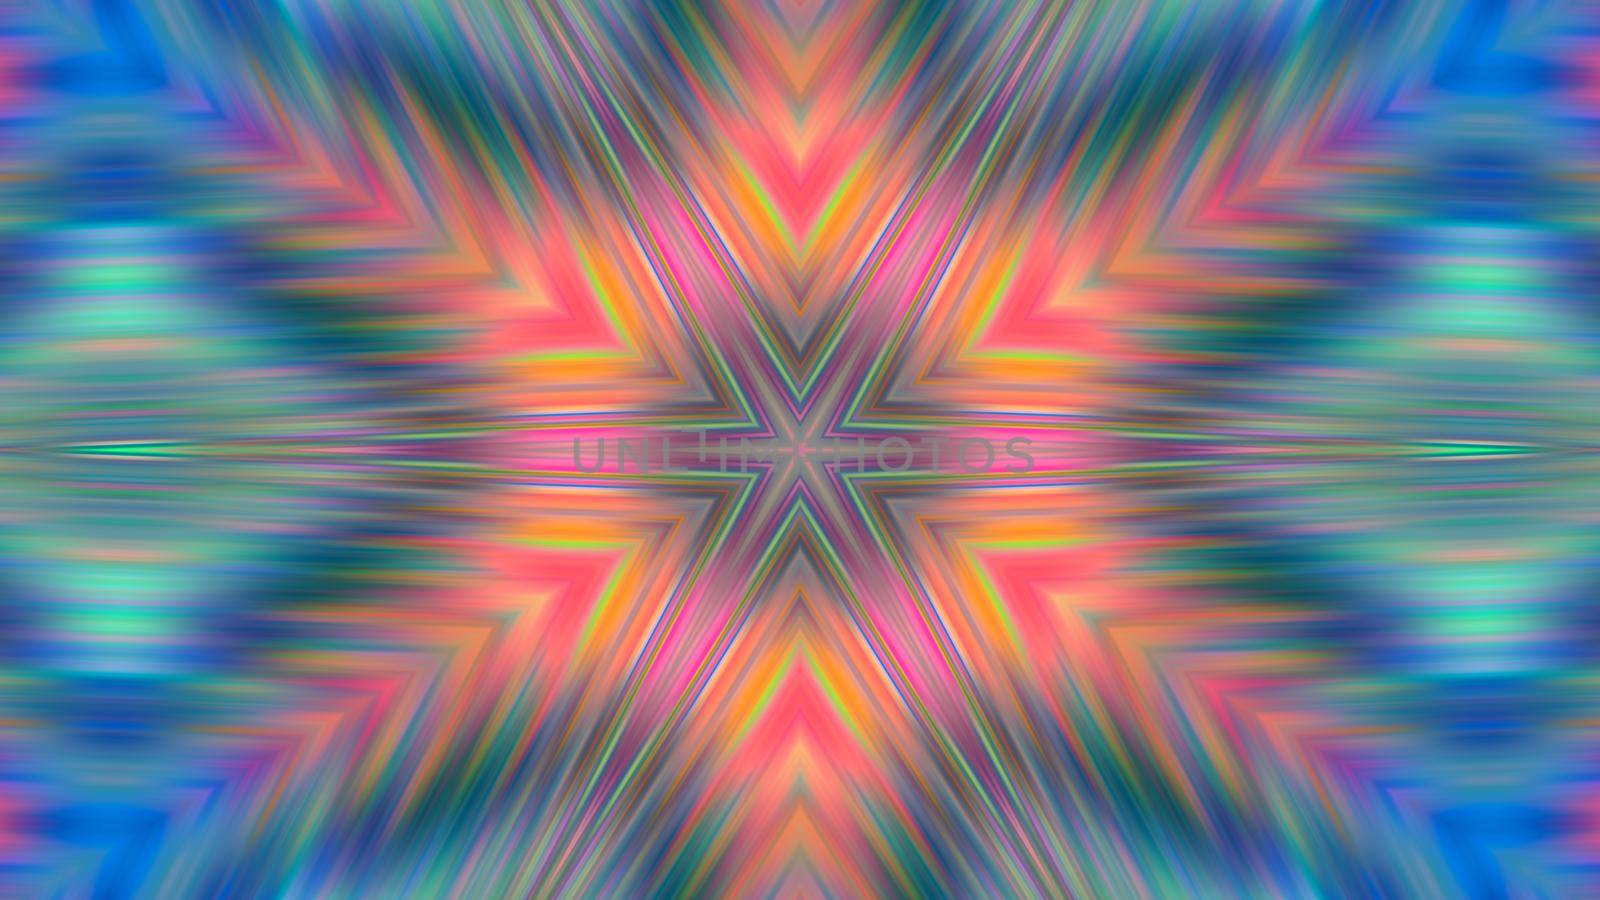 Abstract textured multicolored symmetrical kaleidoscope background